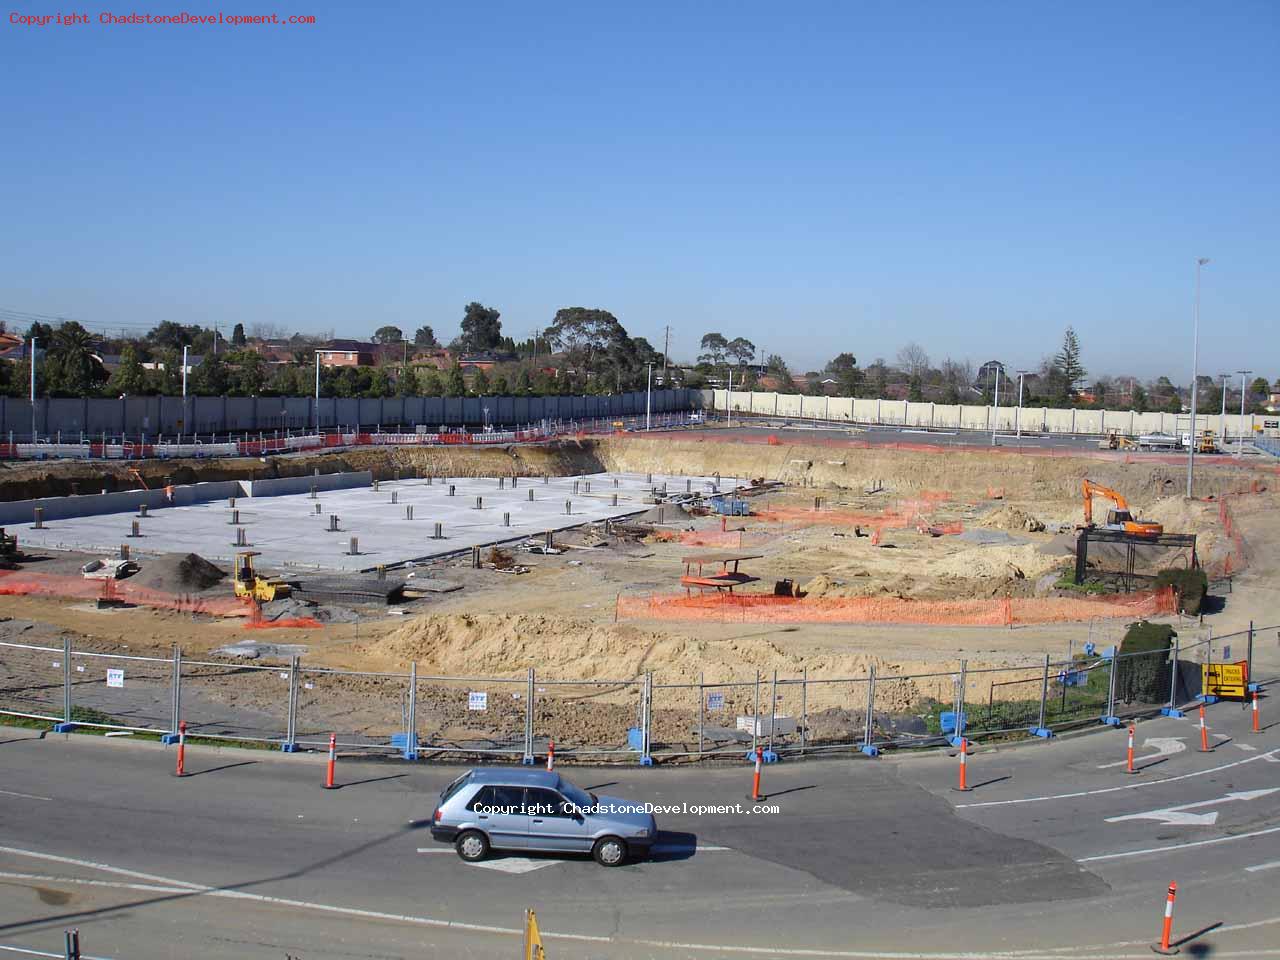 First half of concrete base laid in new multilevel carpark - Chadstone Development Discussions